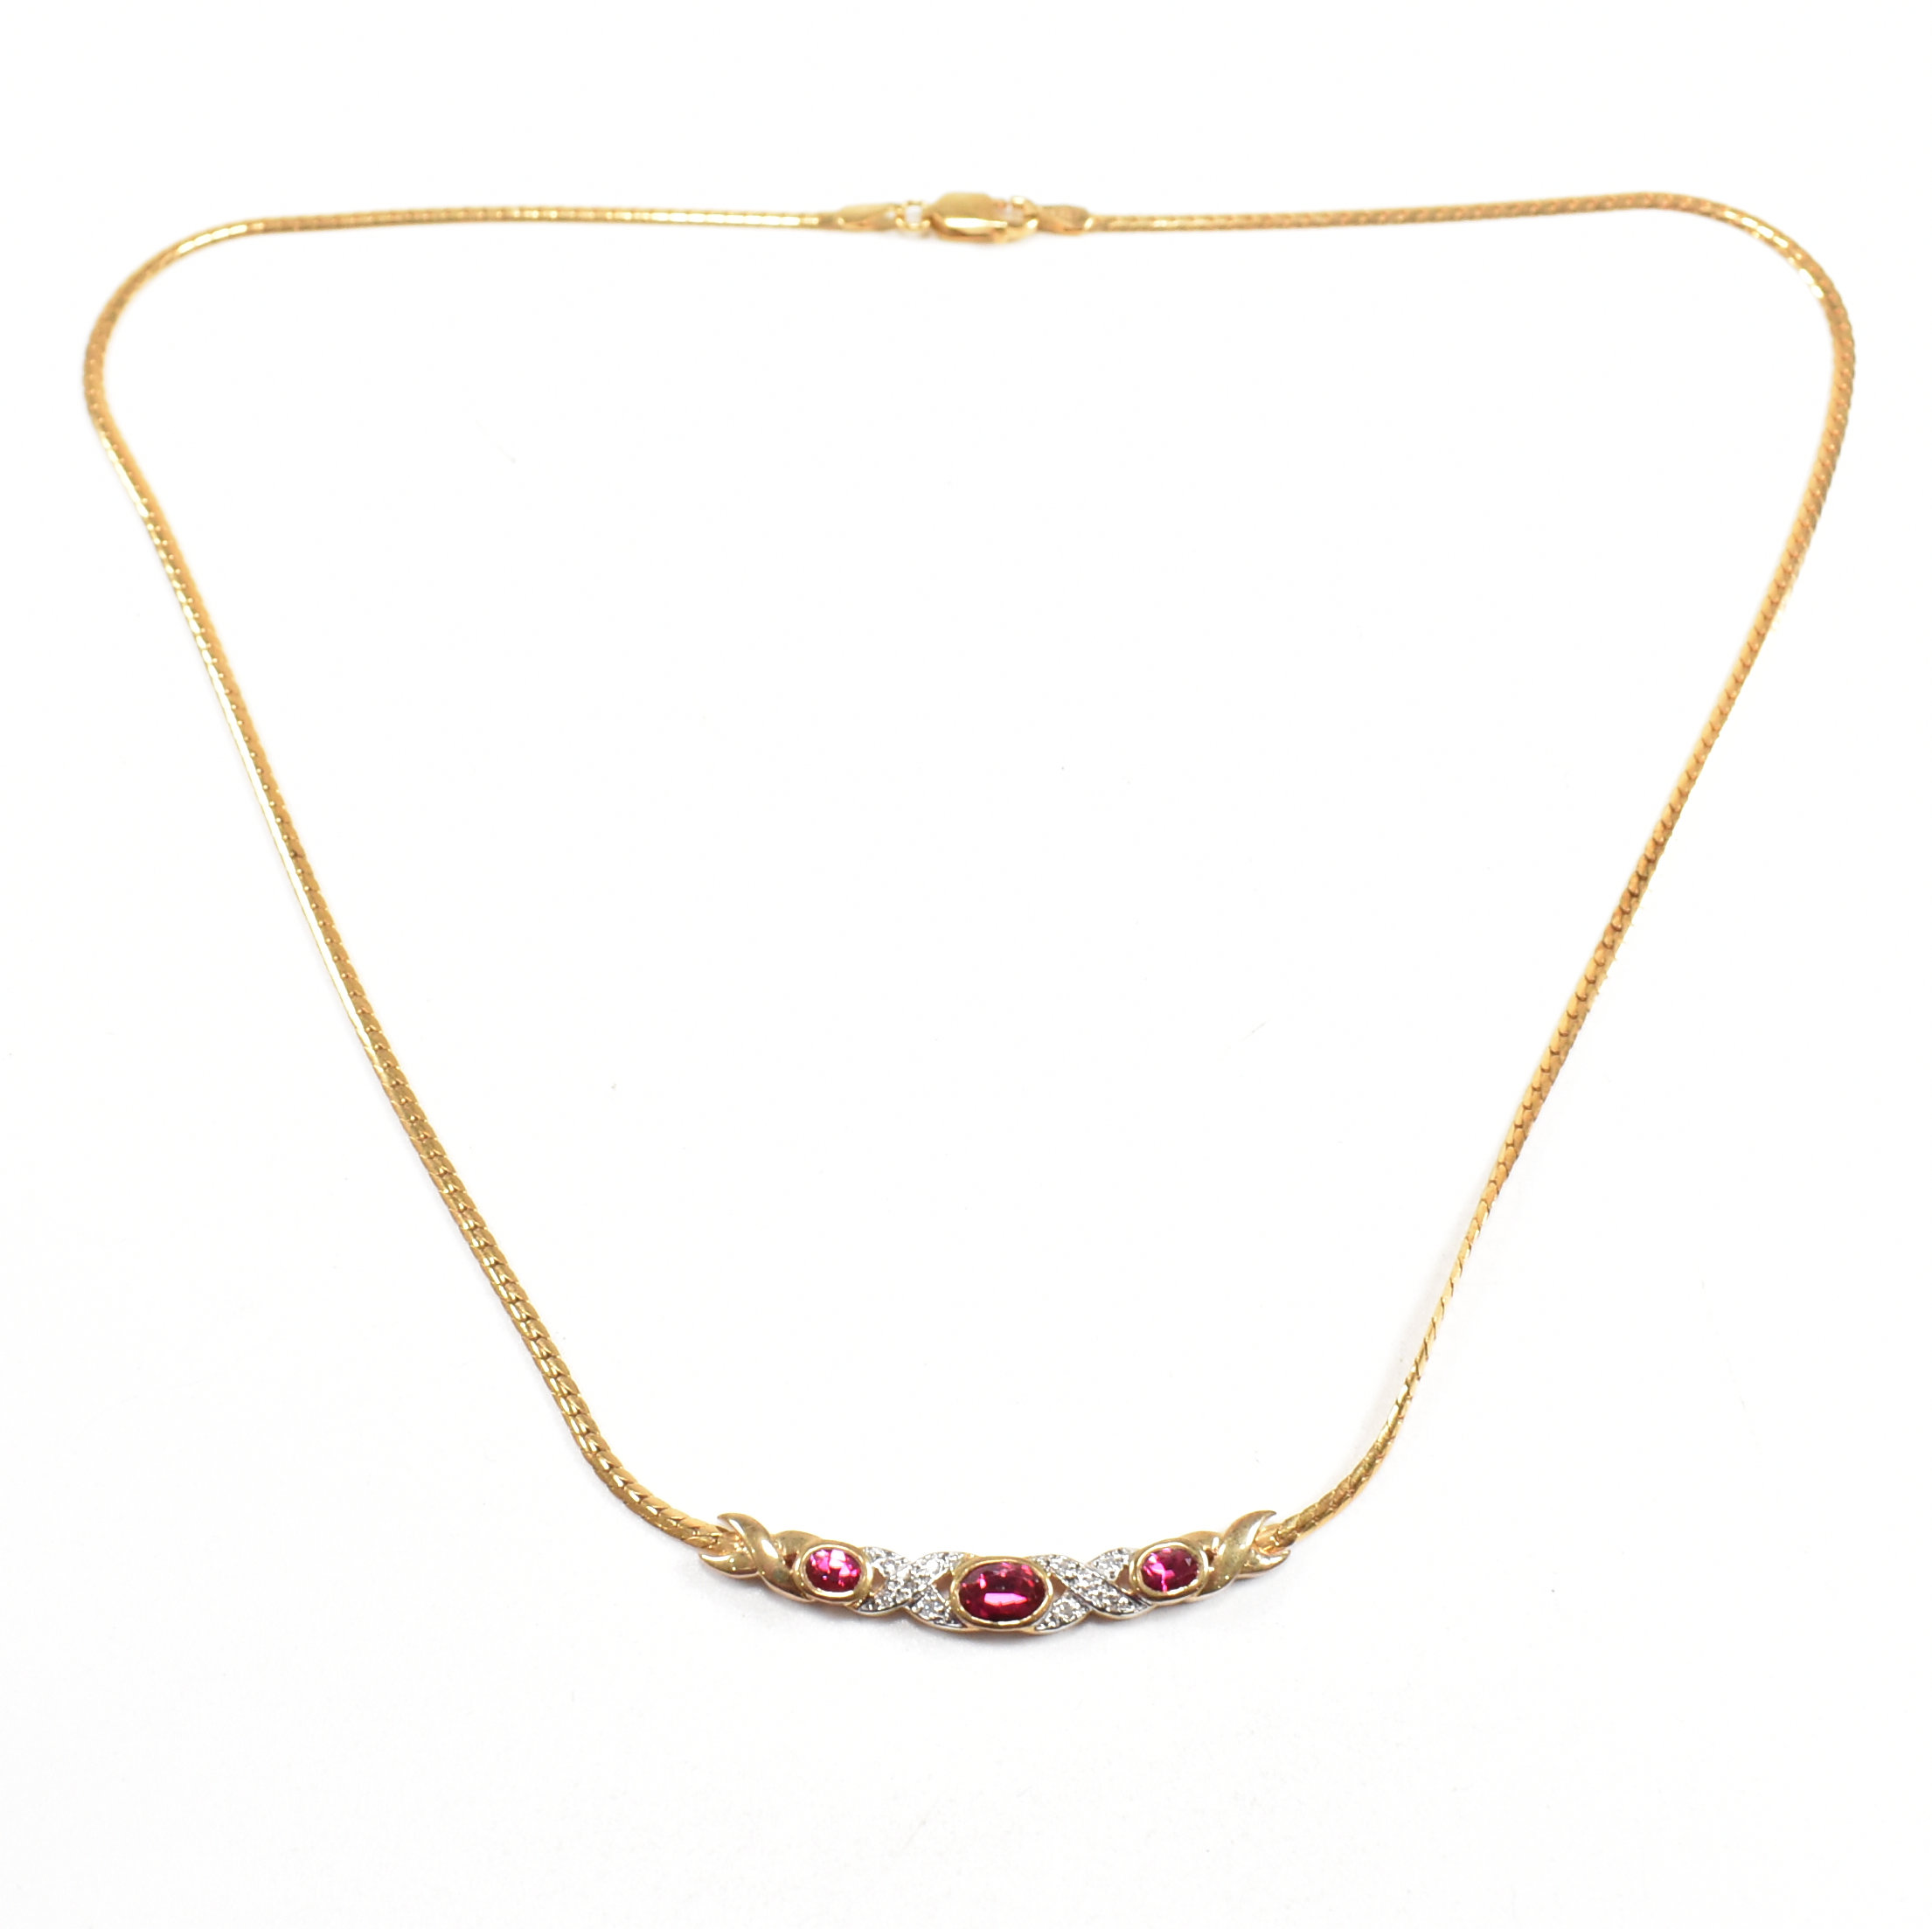 HALLMARKED 9CT GOLD SYNTHETIC RUBY & DIAMOND PENDANT NECKLACE - Image 4 of 5